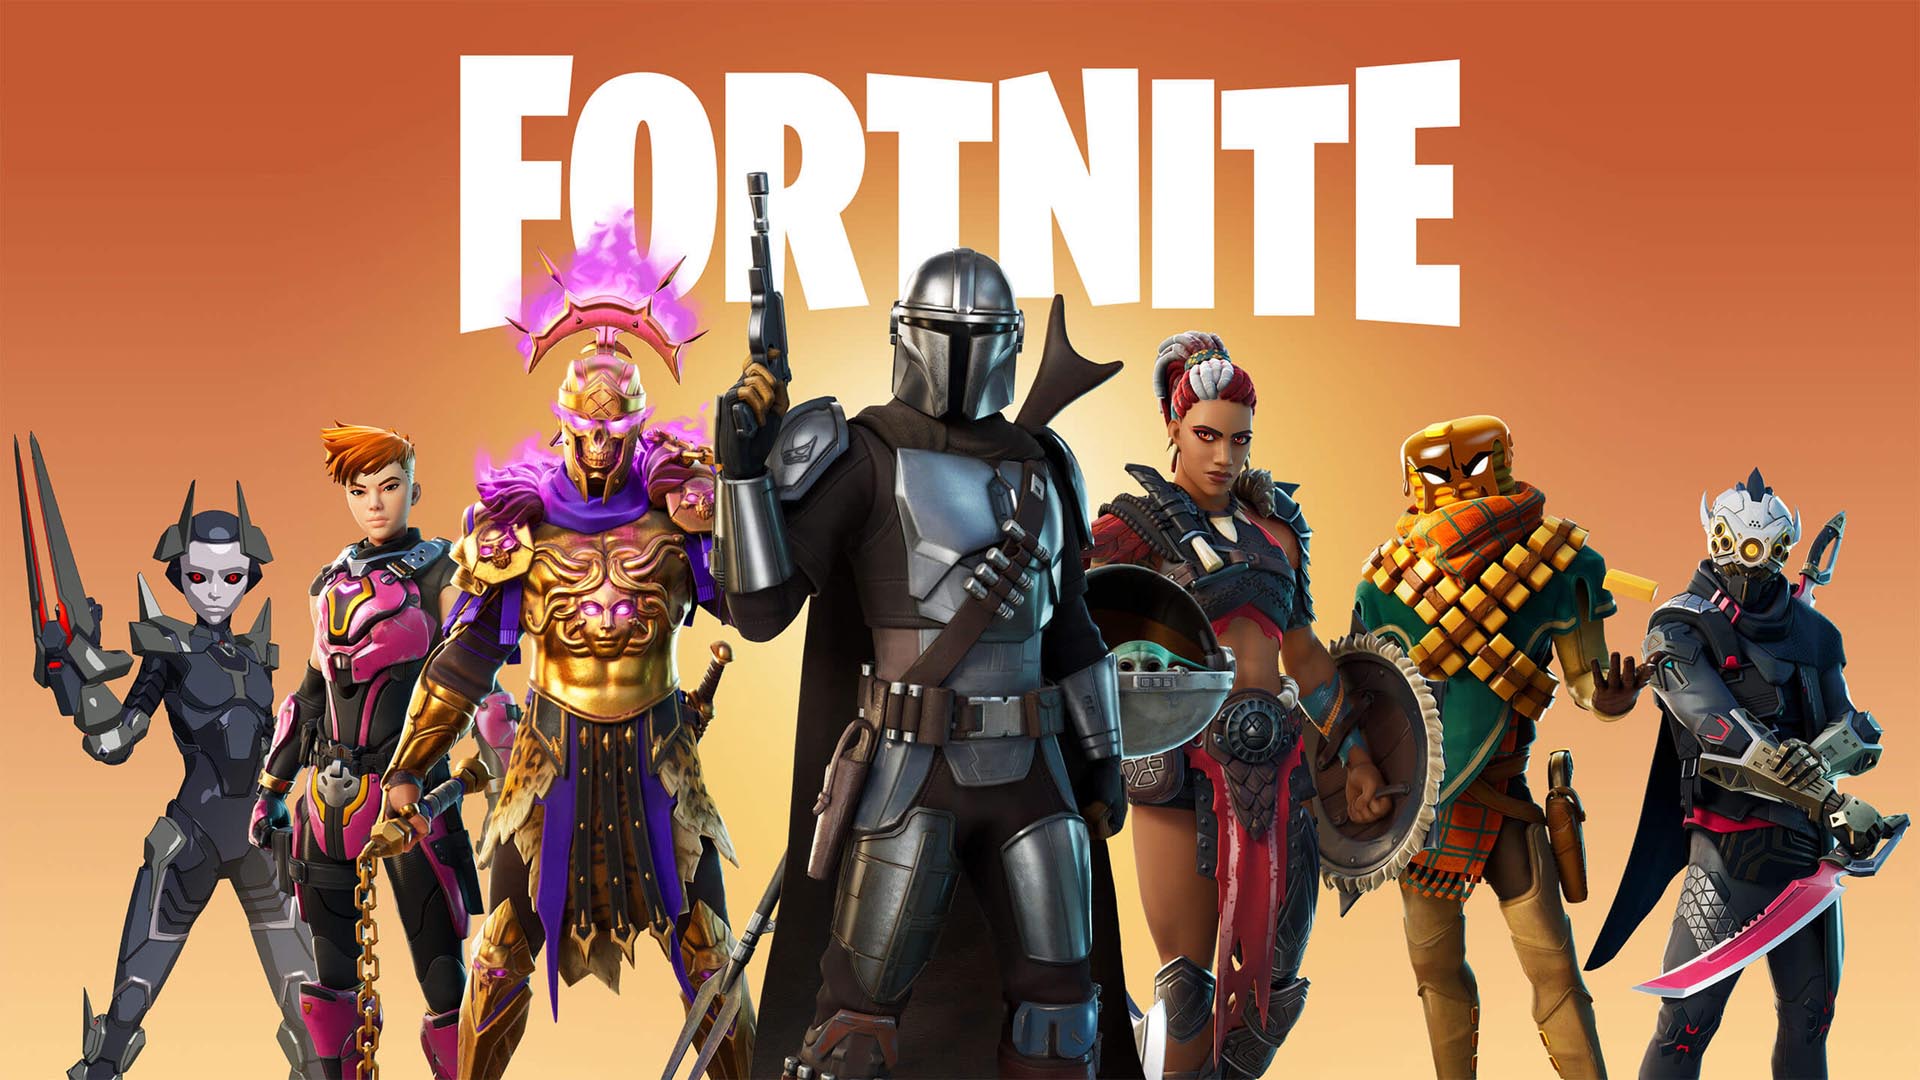 Fortnite mobile battle royale game shut down in China: Know the reason